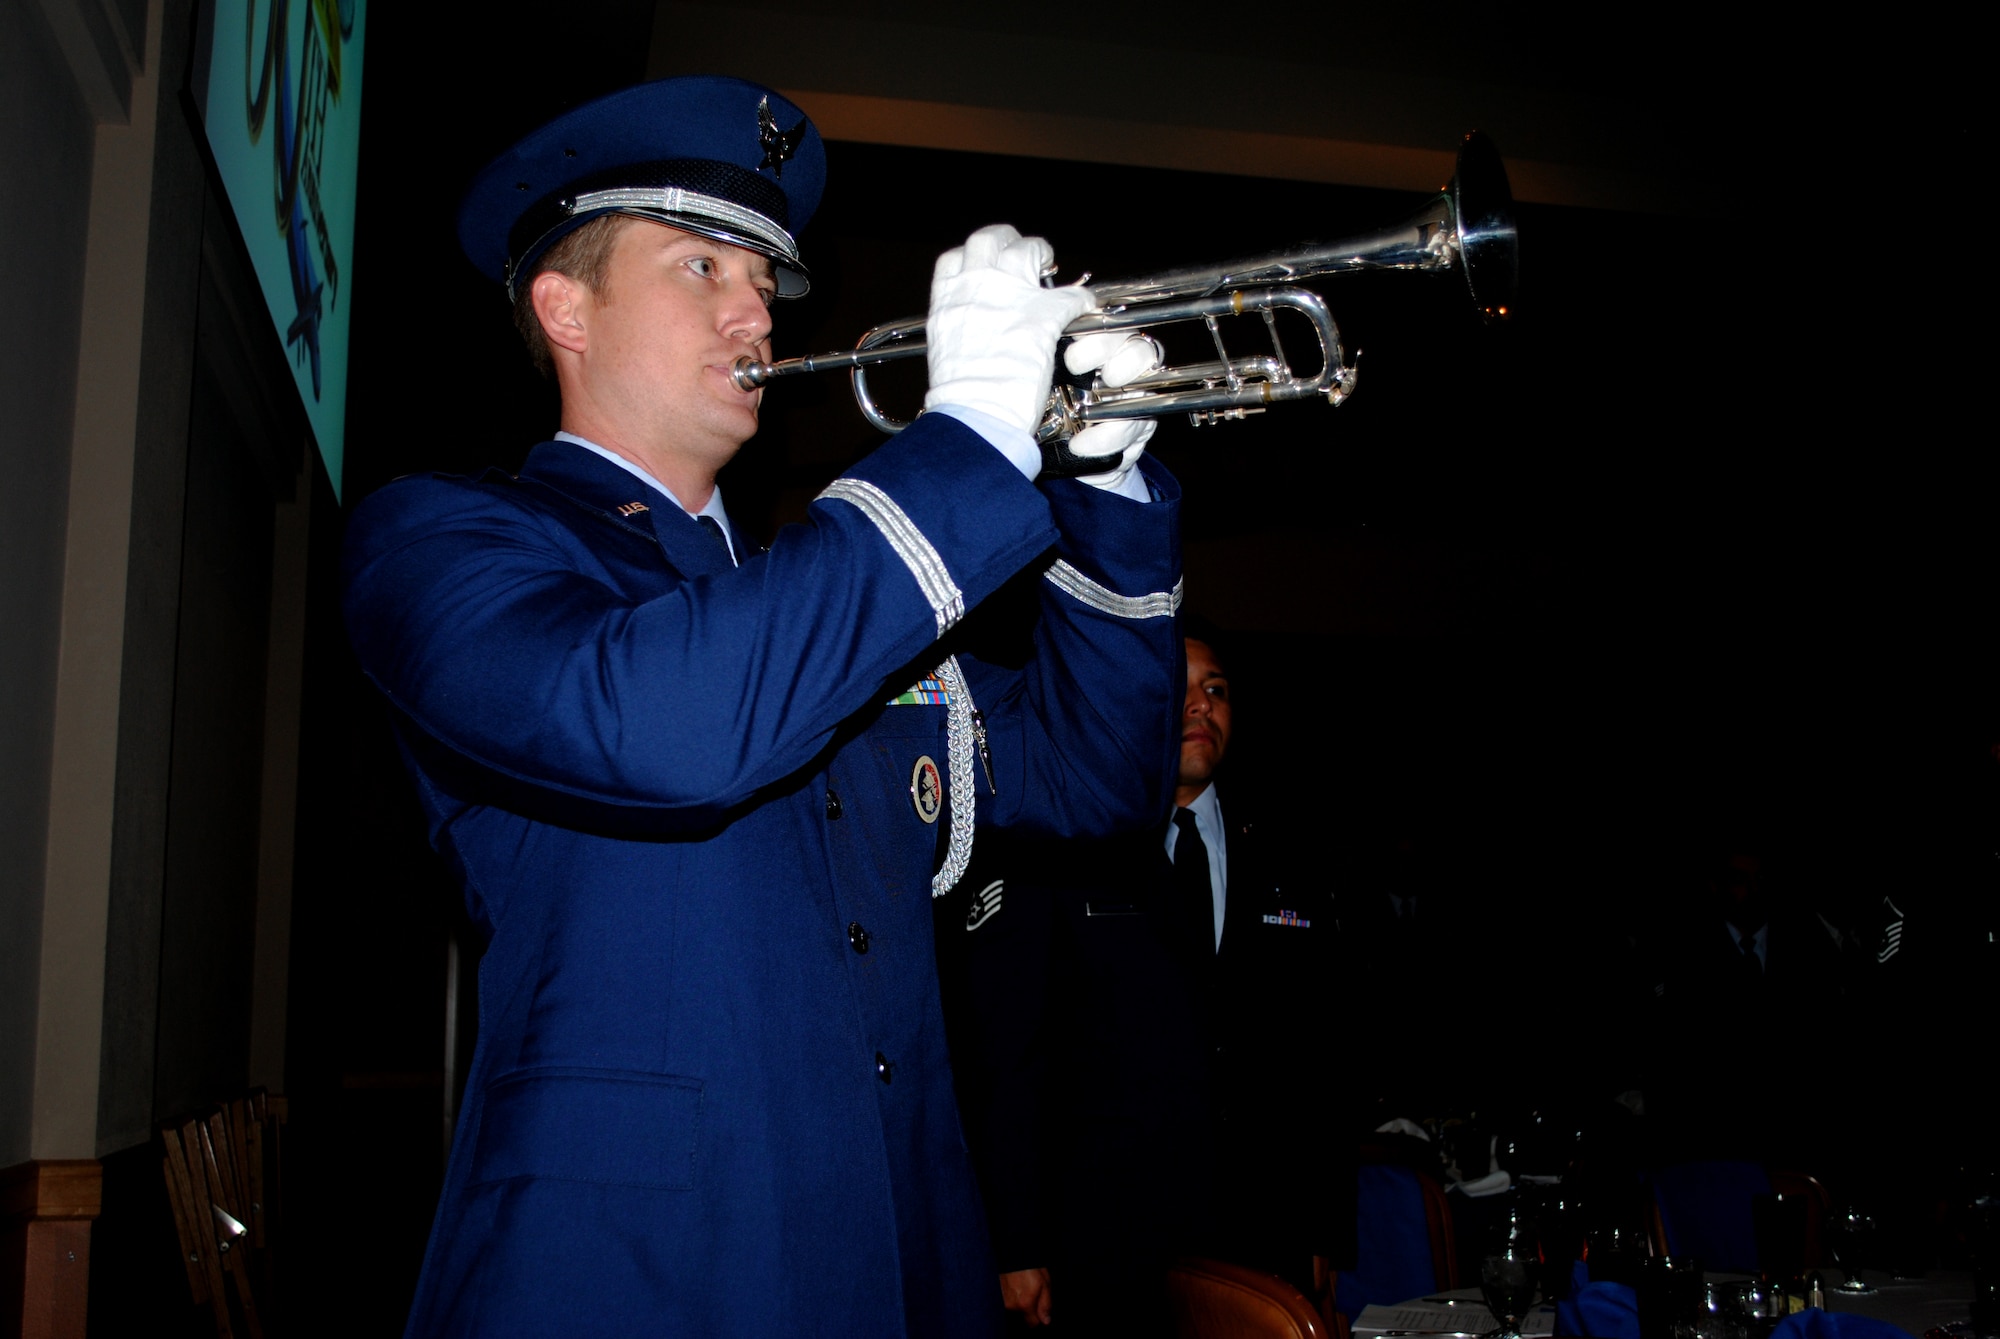 Capt. Stephen Brint Carlton, 433rd Airlift Wing Honor Guard trumpeter, plays, "Amazing grace," while guests stand respectfully in silence during a POW/MIA table ceremony. The solemn ceremony for the and service members categorized as prisoners of war and missing in action was part of a series of activities  conducted during the 433rd Airlift Wing 60th Anniversary Dinner held Sept. 10, 2011, at the Gateway Club on Lackland Air Force Base, Texas.   (U.S. Air Force photo/Senior Airman Luis Loza Gutierrez)